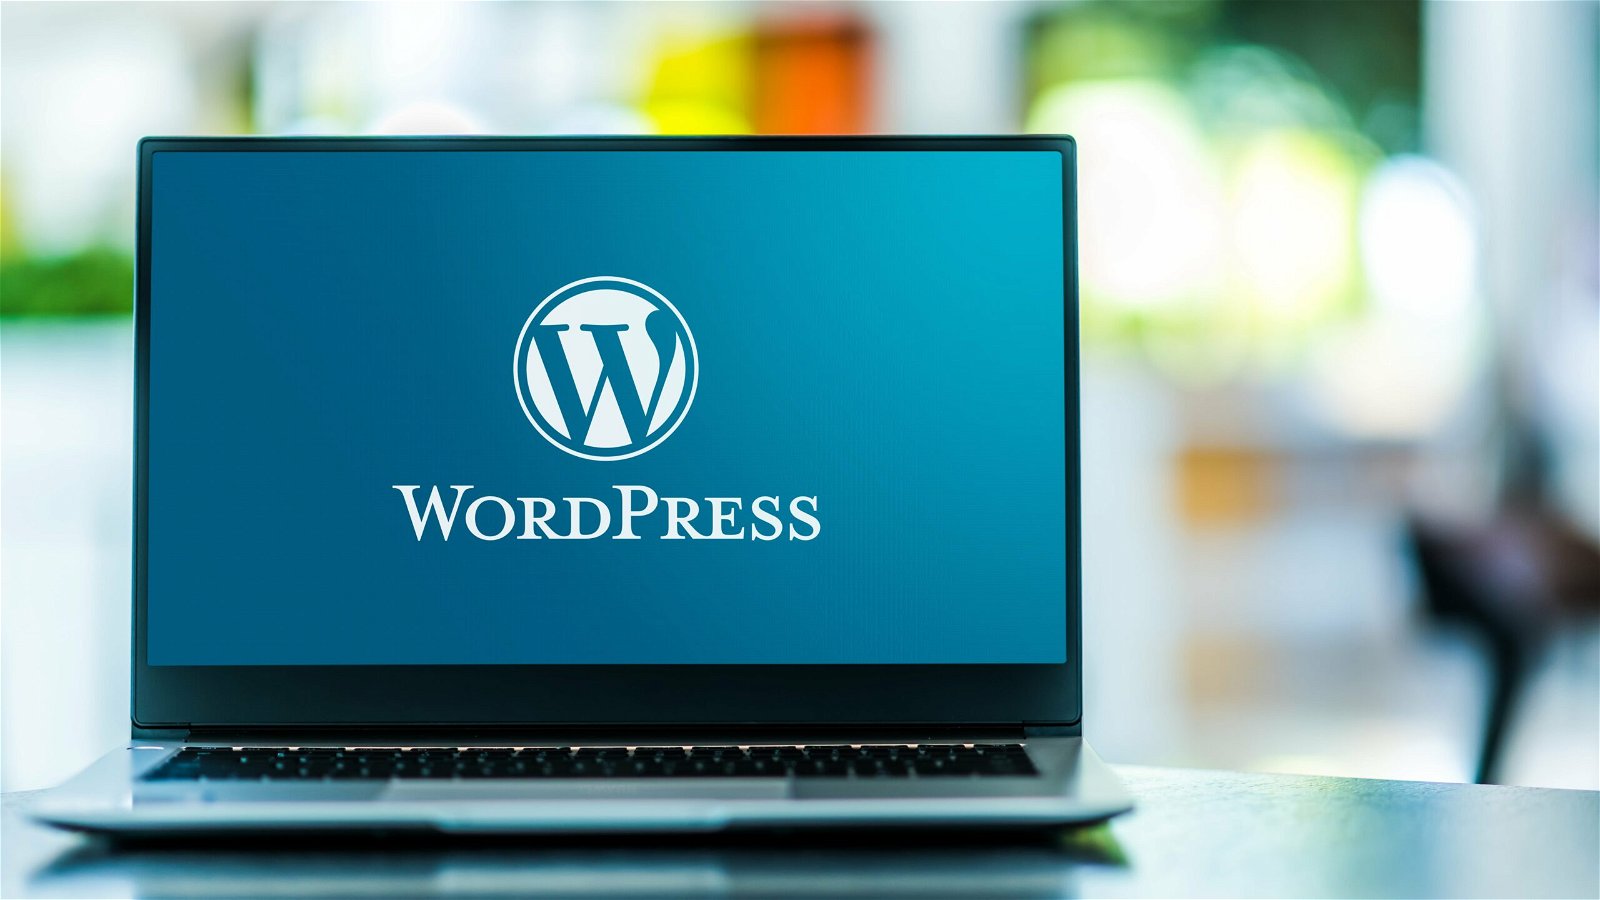 Thousands of WordPress sites are threatened by unreliable plugins